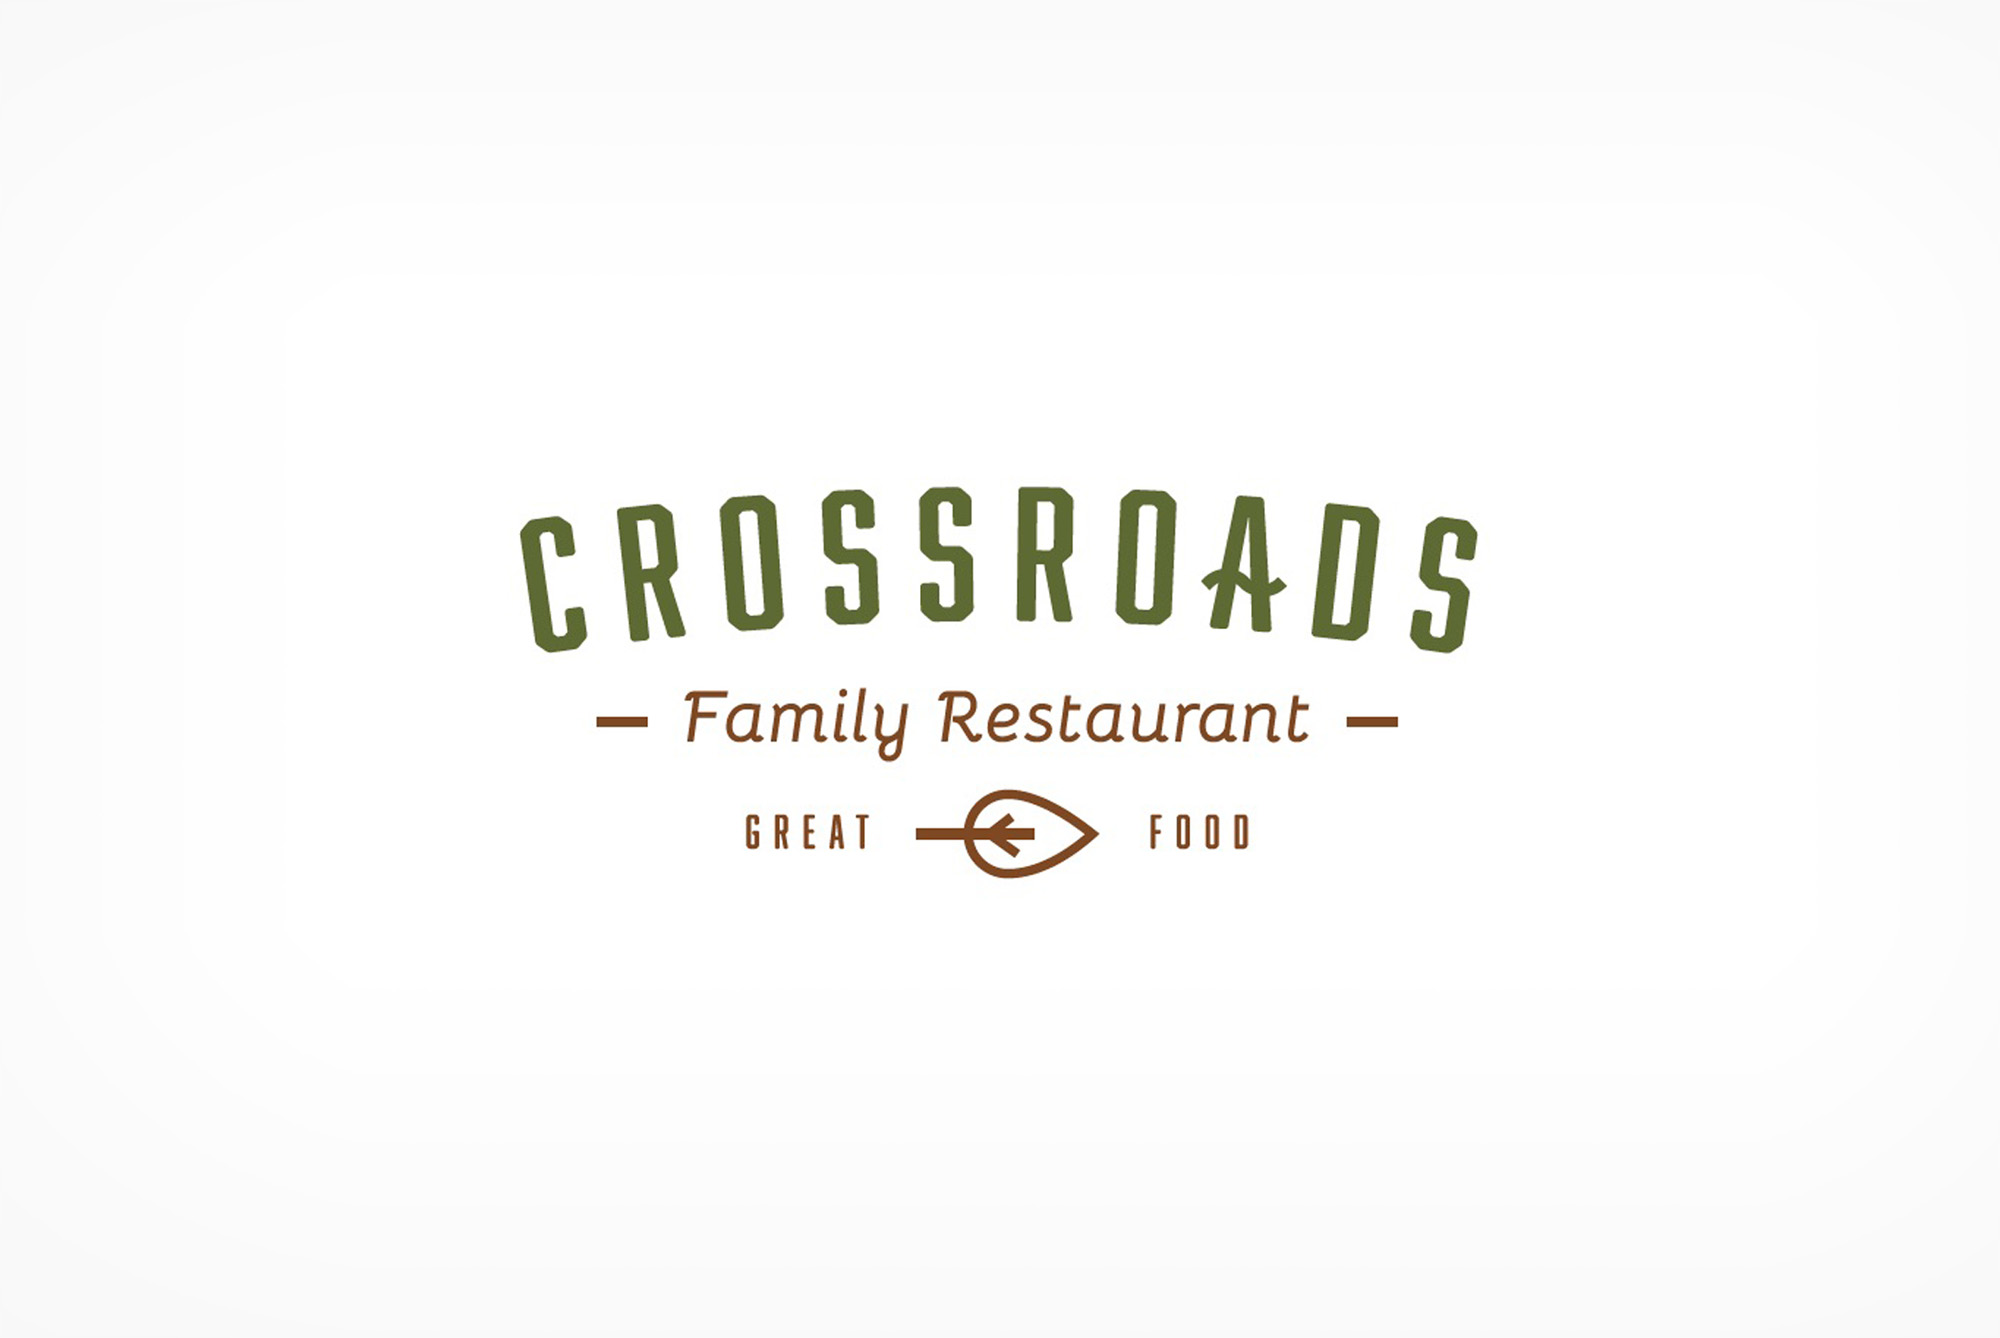 Crossroads Family Restaurant logo design was a rebrand for new owners of the rural Washington State classic diner.